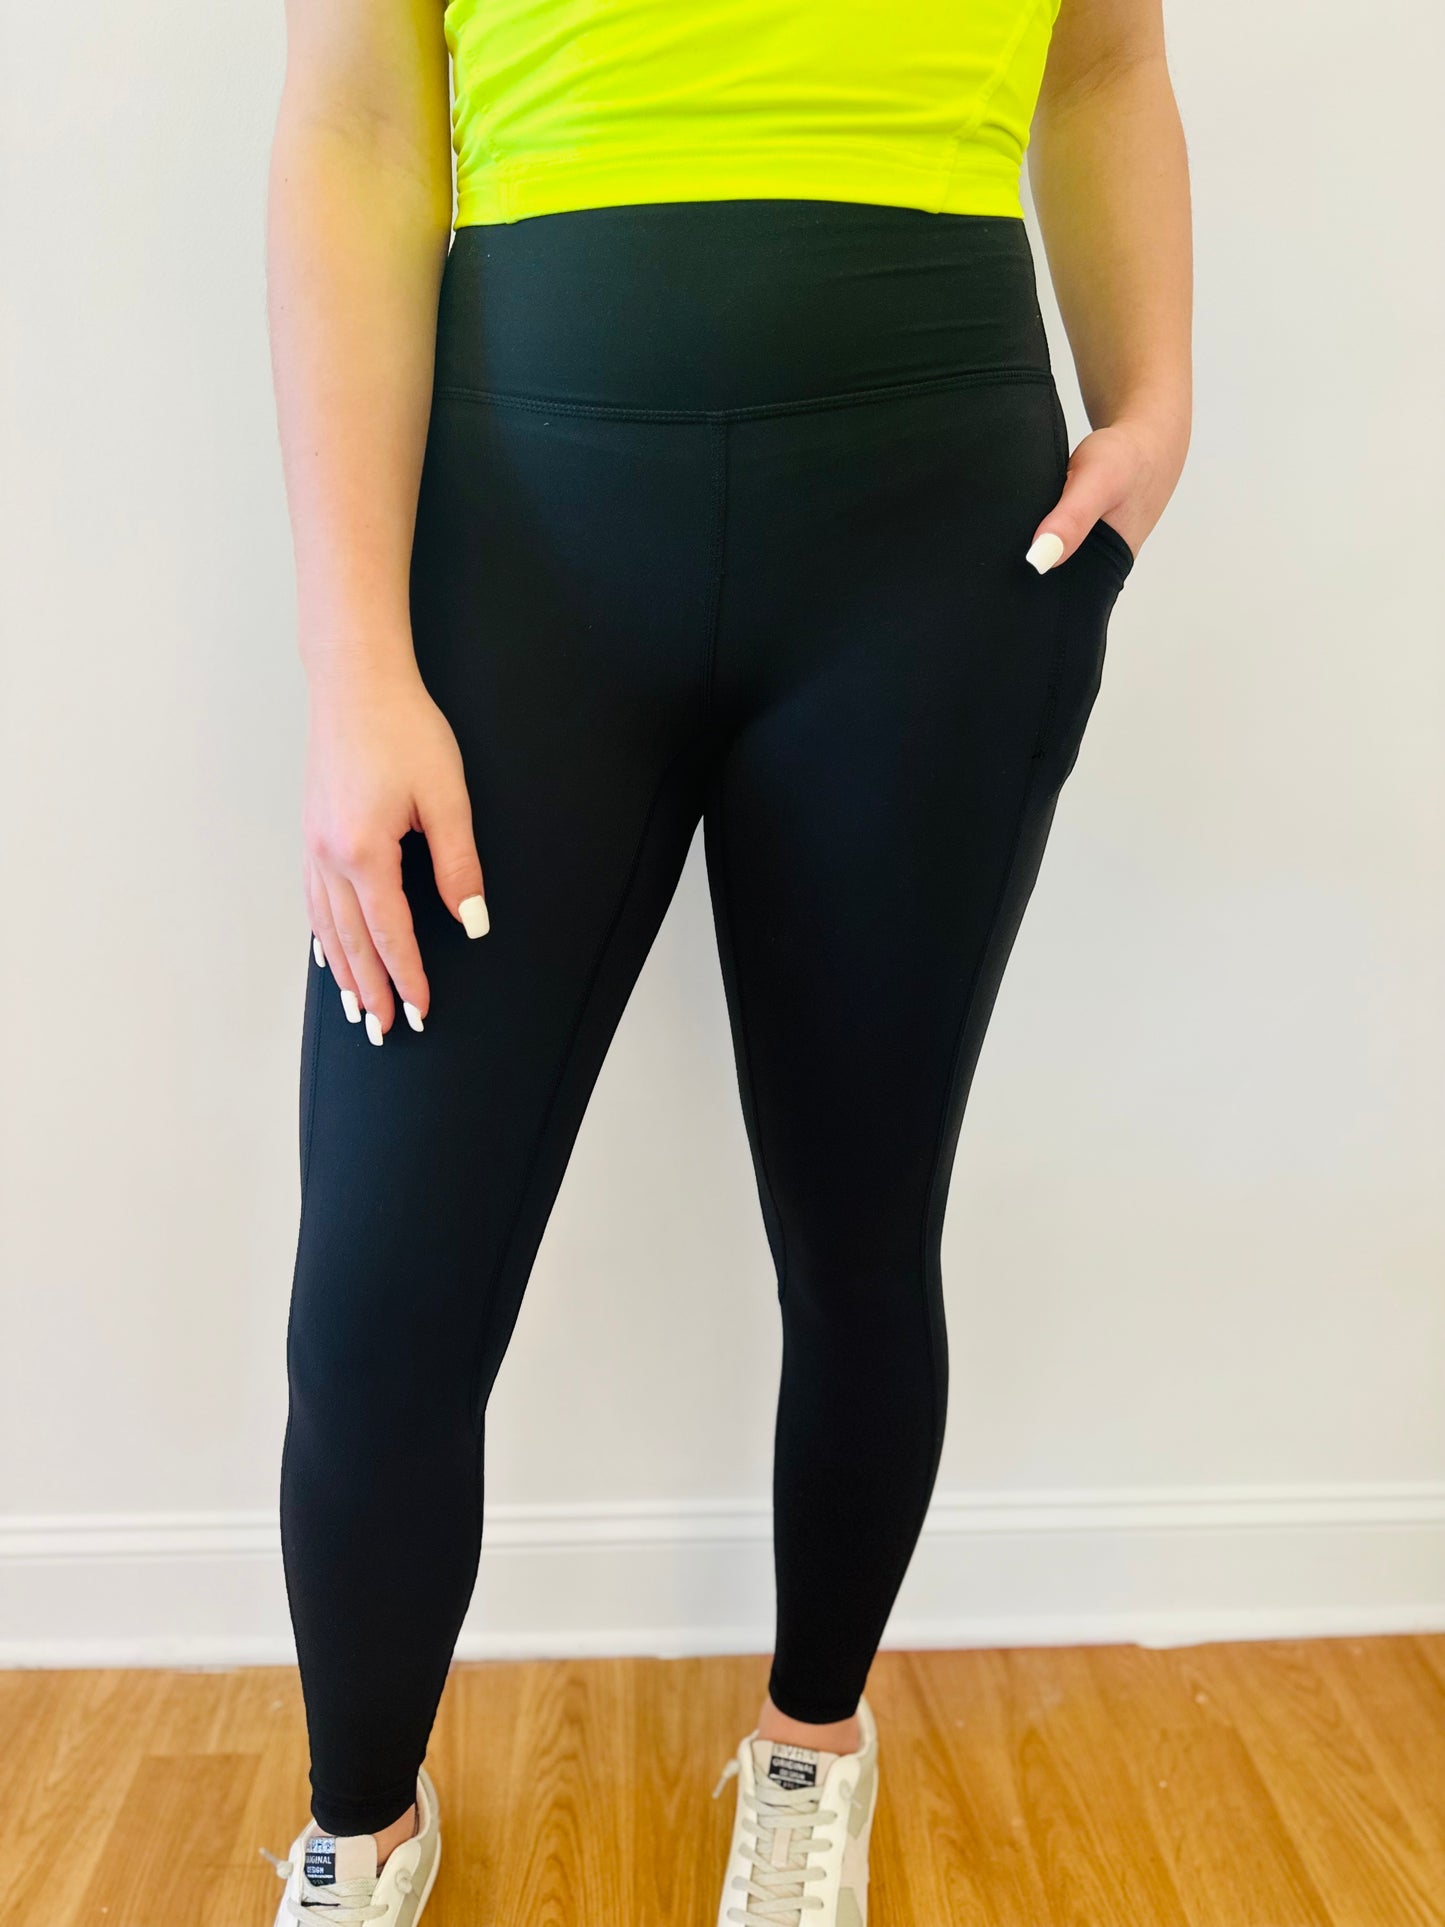 BUTTER YOGA PANTS WITH SIDE POCKETS Black